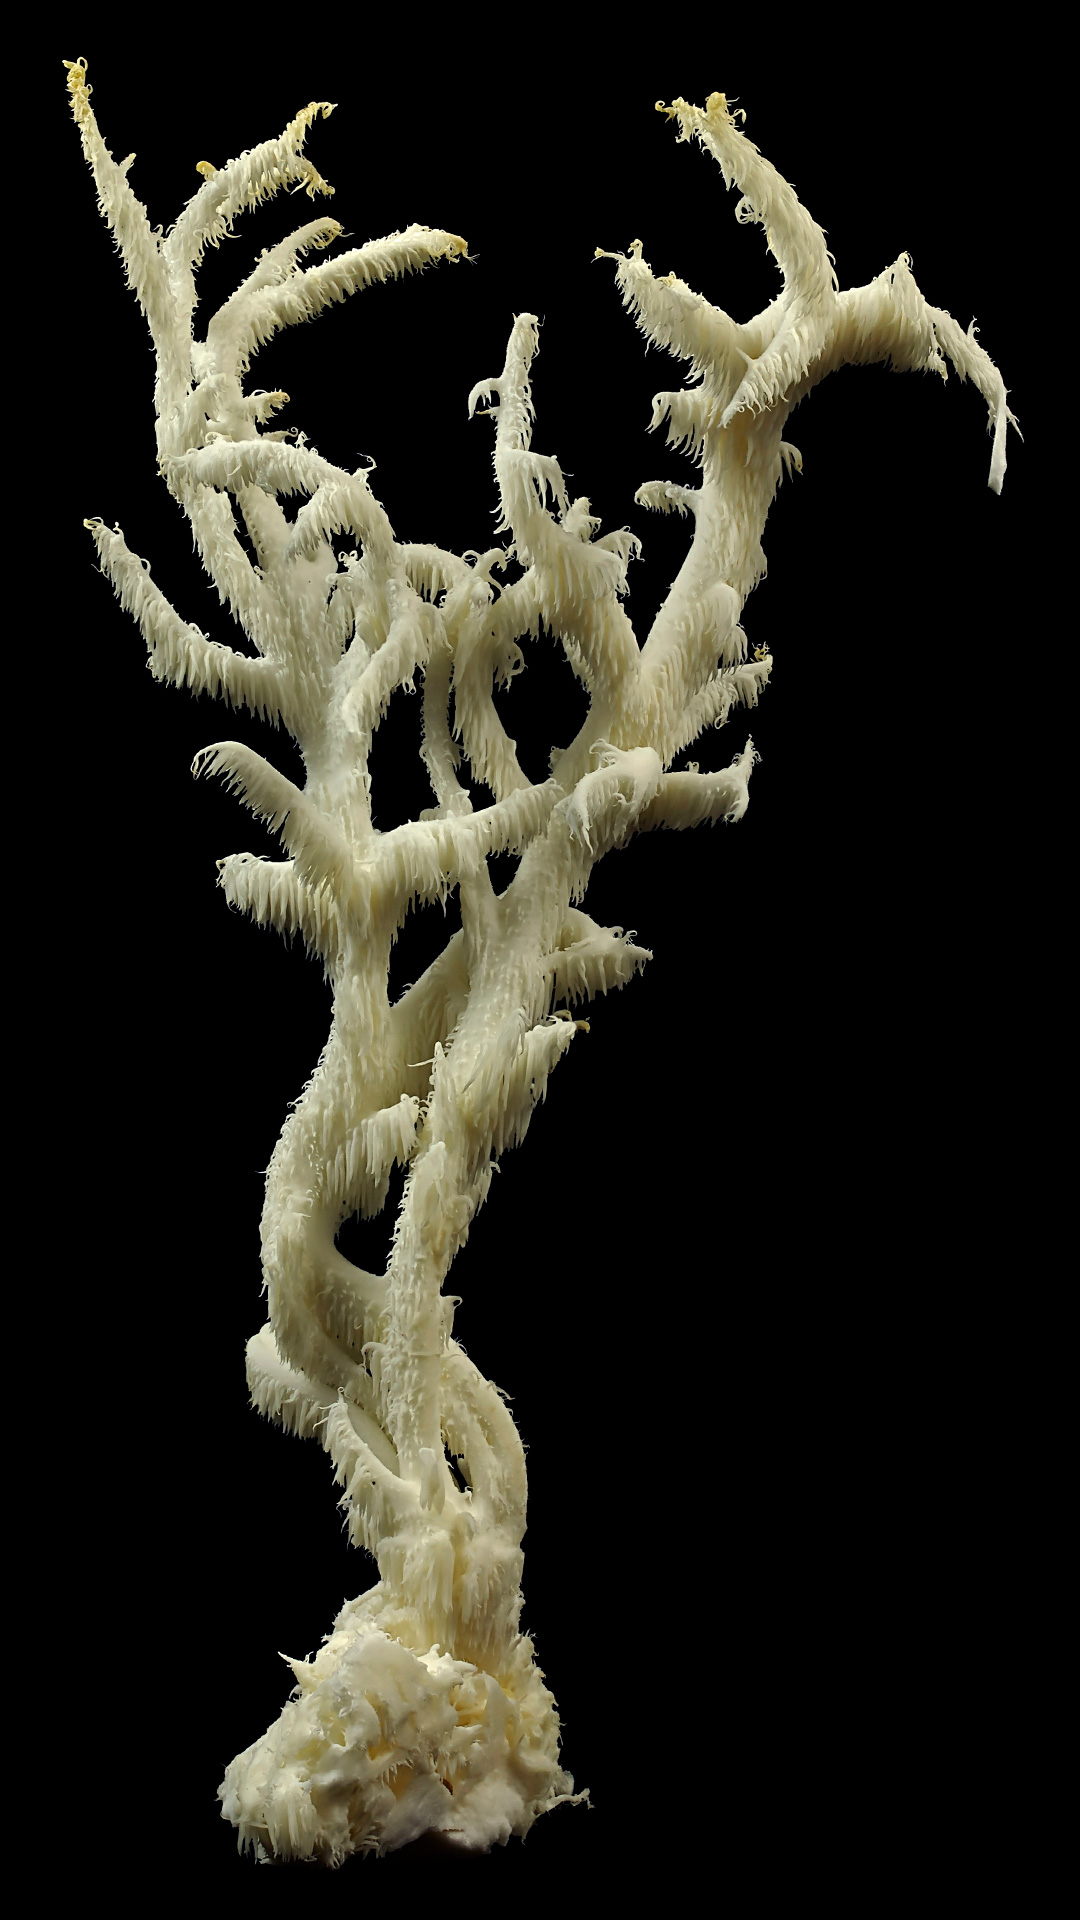 Coral tooth fungus: Hericium coralloides